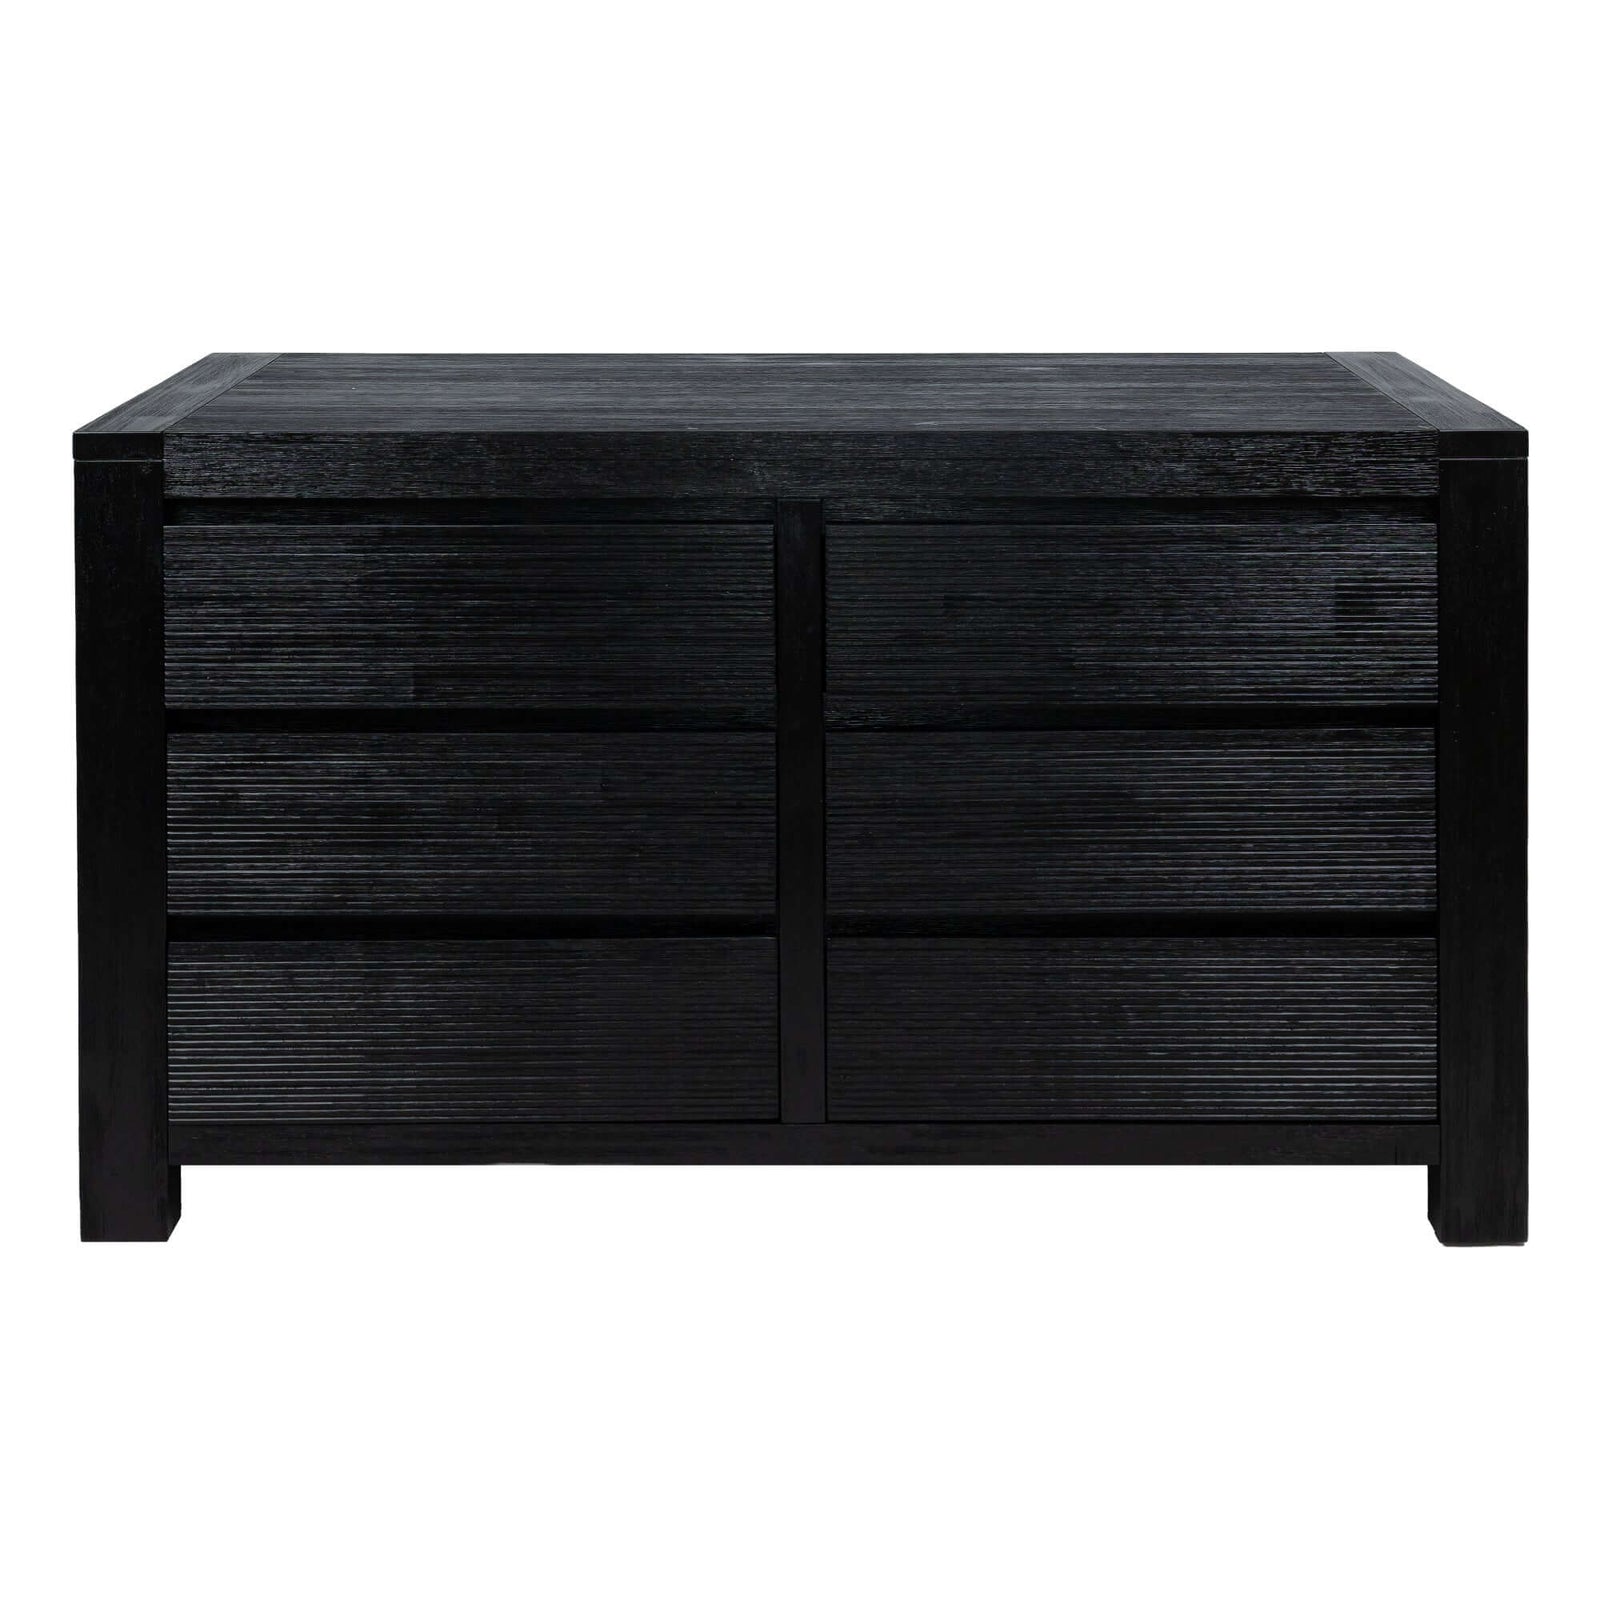 Tofino Dresser 6 Chest of Drawers Solid Wood Bedroom Storage Cabinet - Black-Upinteriors